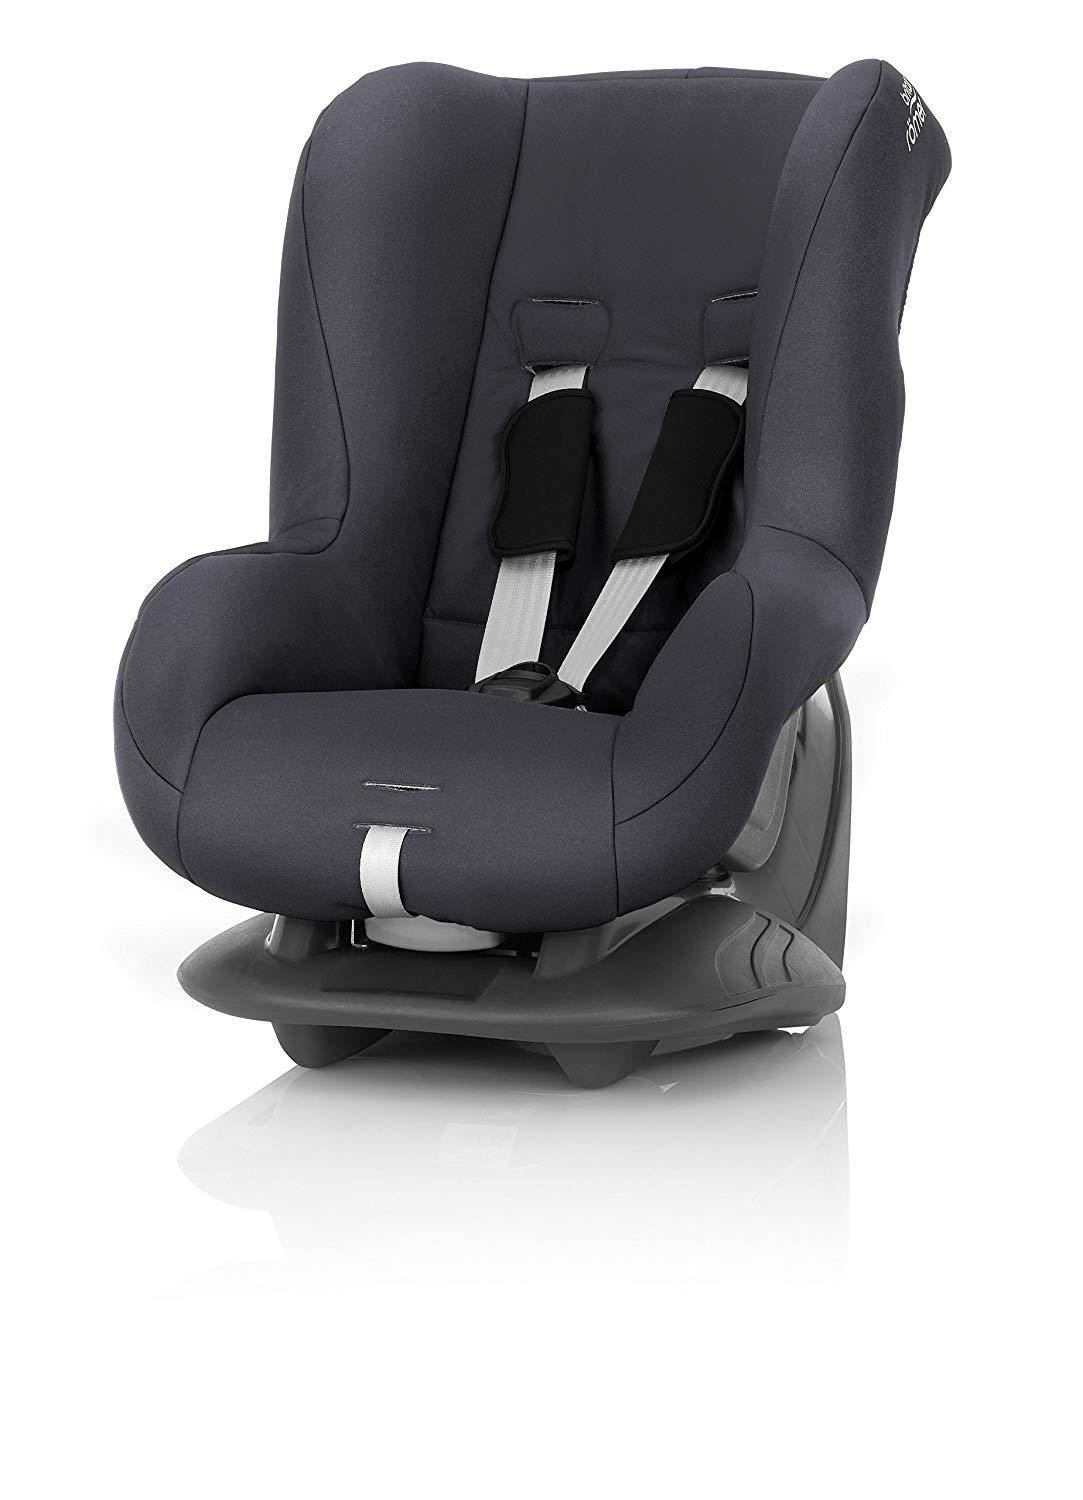 Britax Romer BRITAX RÖMER ECLIPSE Child Seat 9-18 kg Lightweight and Compact with Side and Frontal Impact Protection for Children (Group 1), 9 Months to 4 Years, Storm Grey